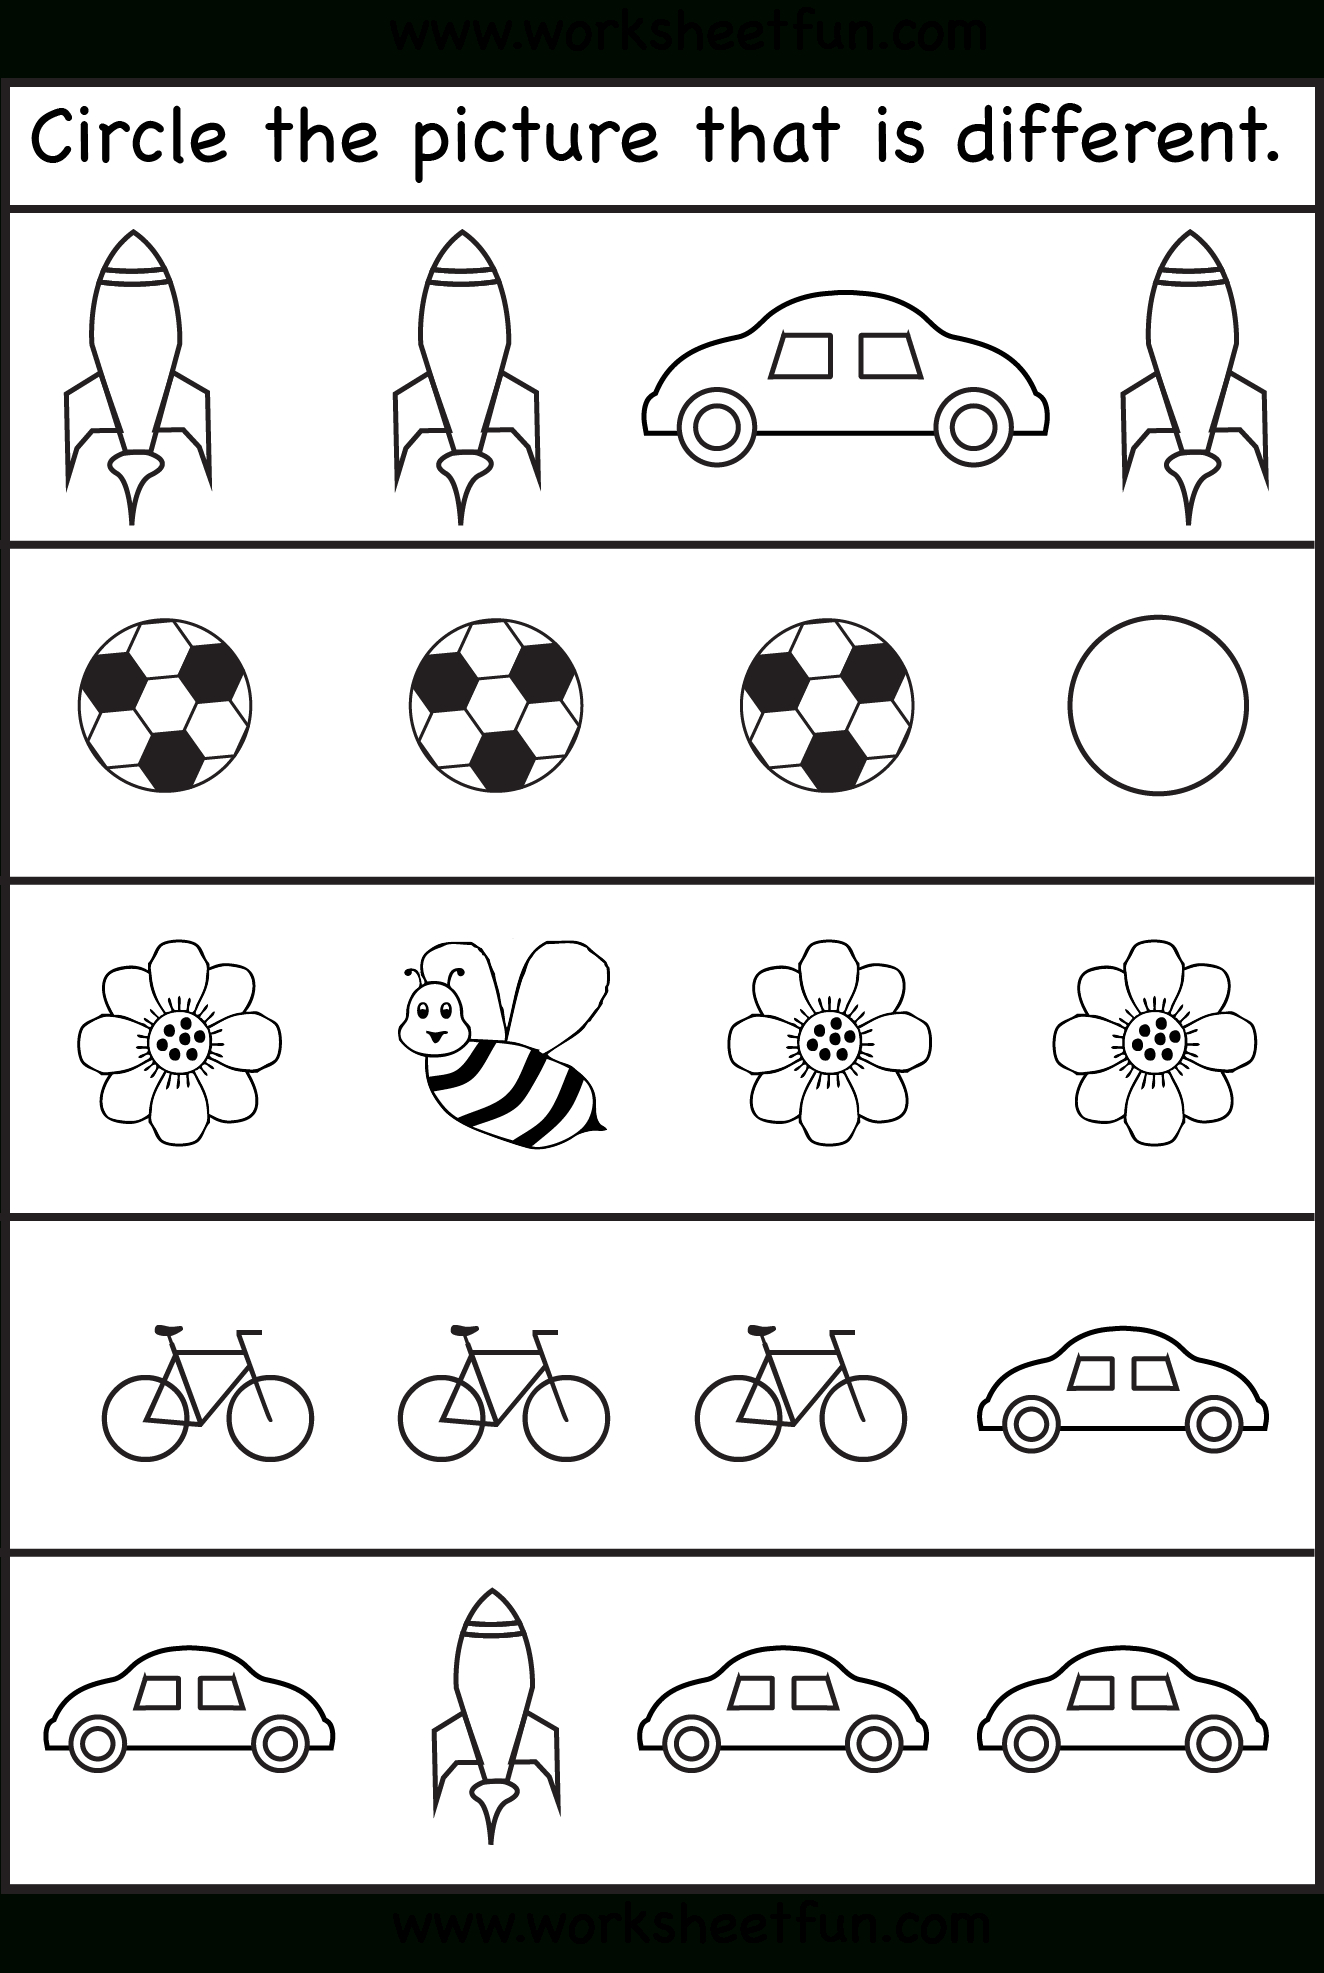 Circle The Picture That Is Different - 4 Worksheets | Preschool Work - Free Printable Toddler Worksheets